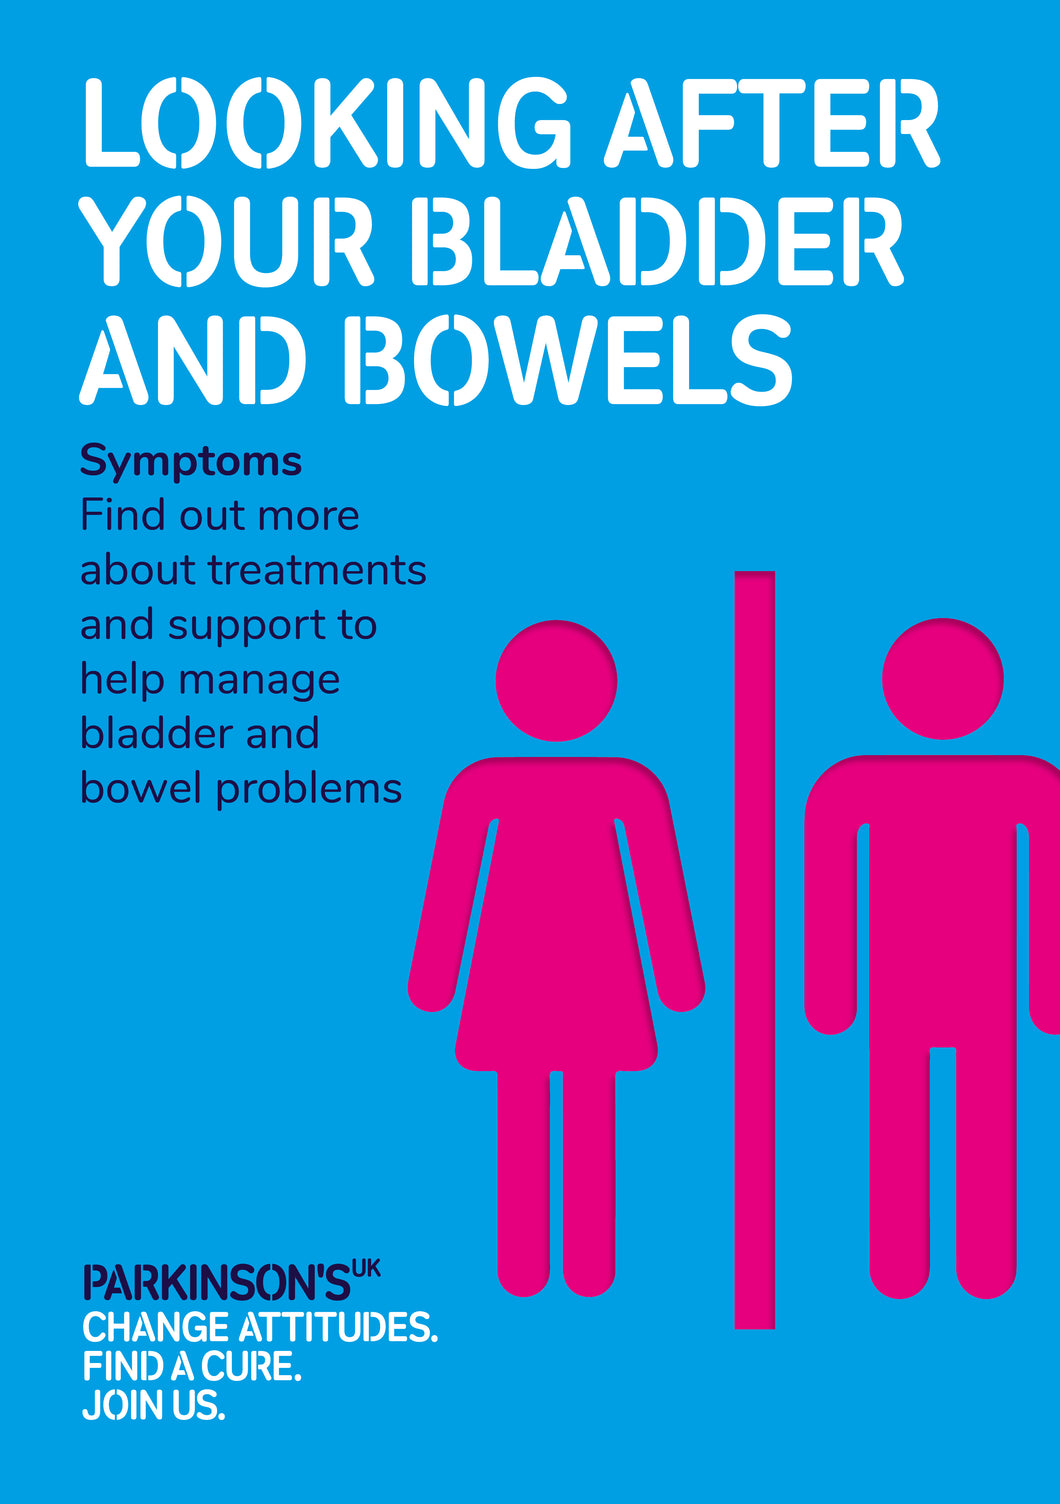 Looking after your bladder and bowels